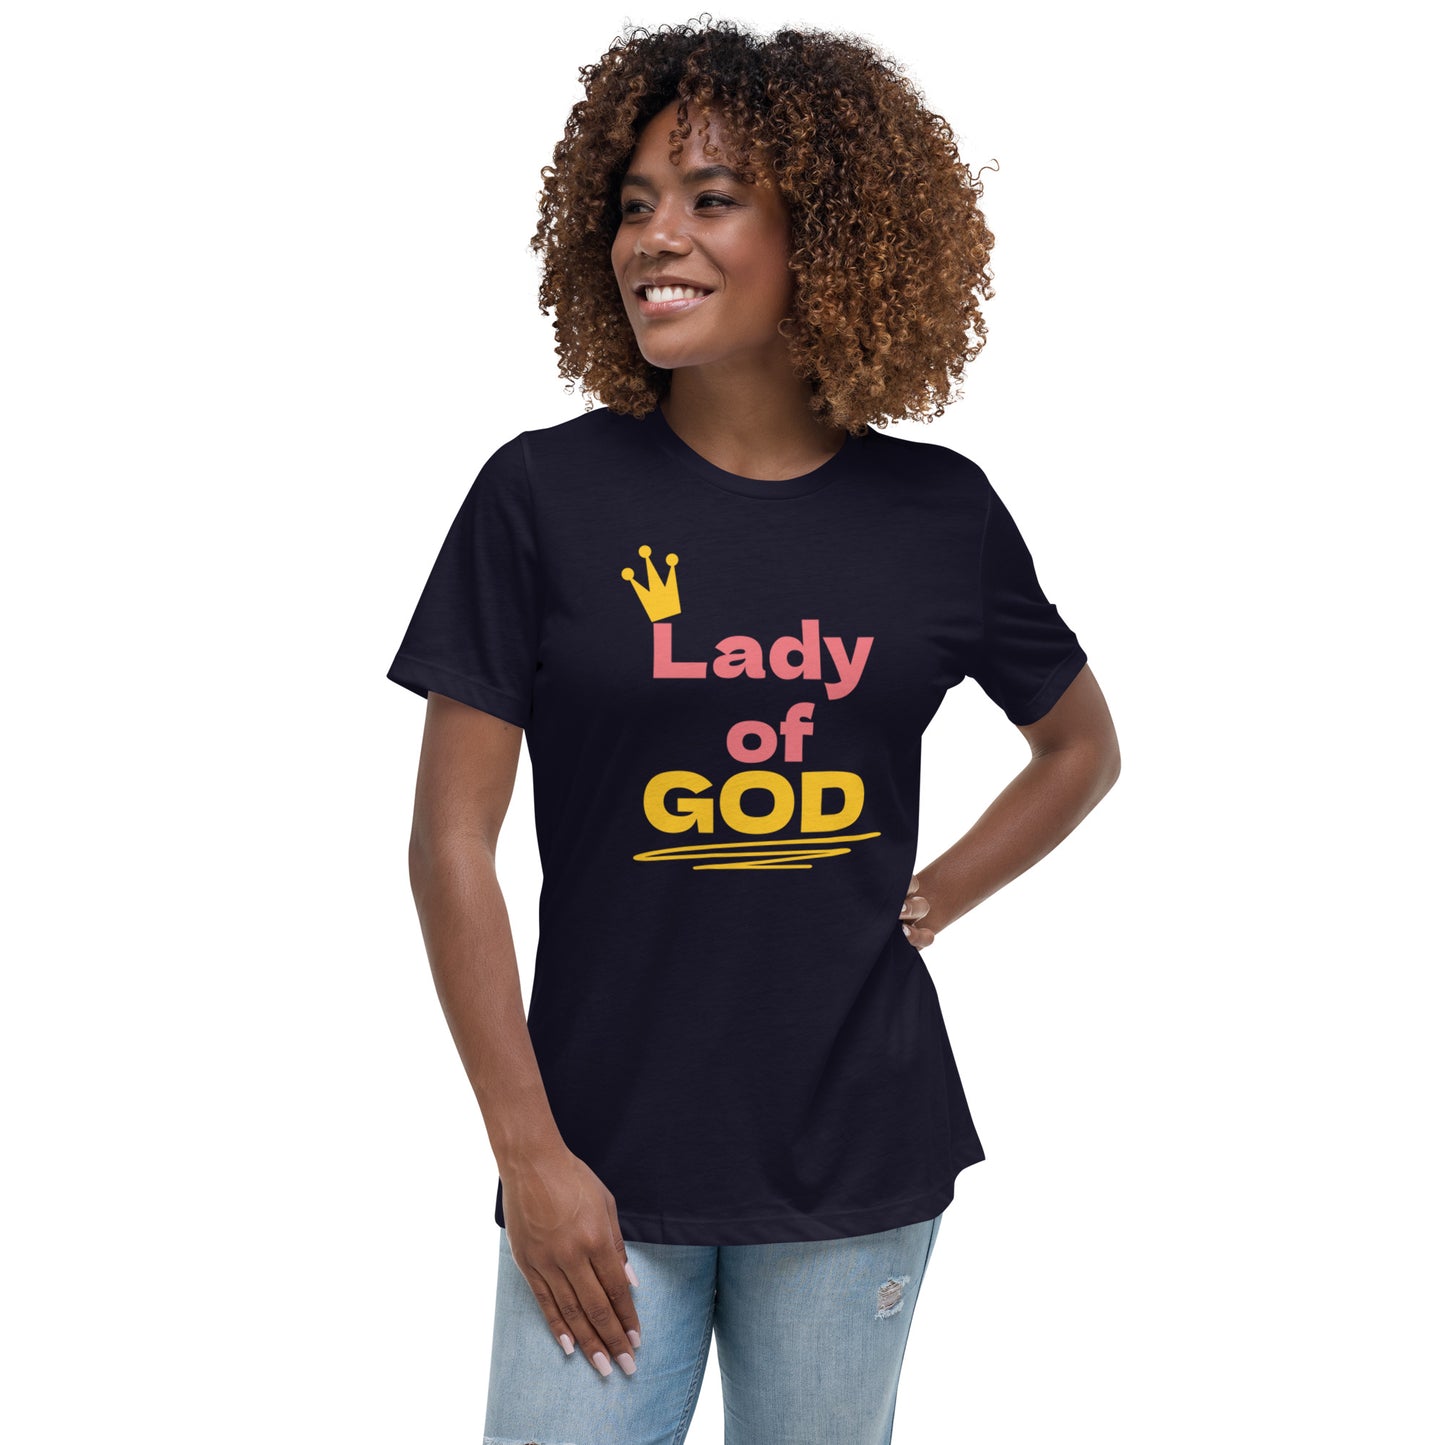 Lady of God Women's Relaxed T-Shirt